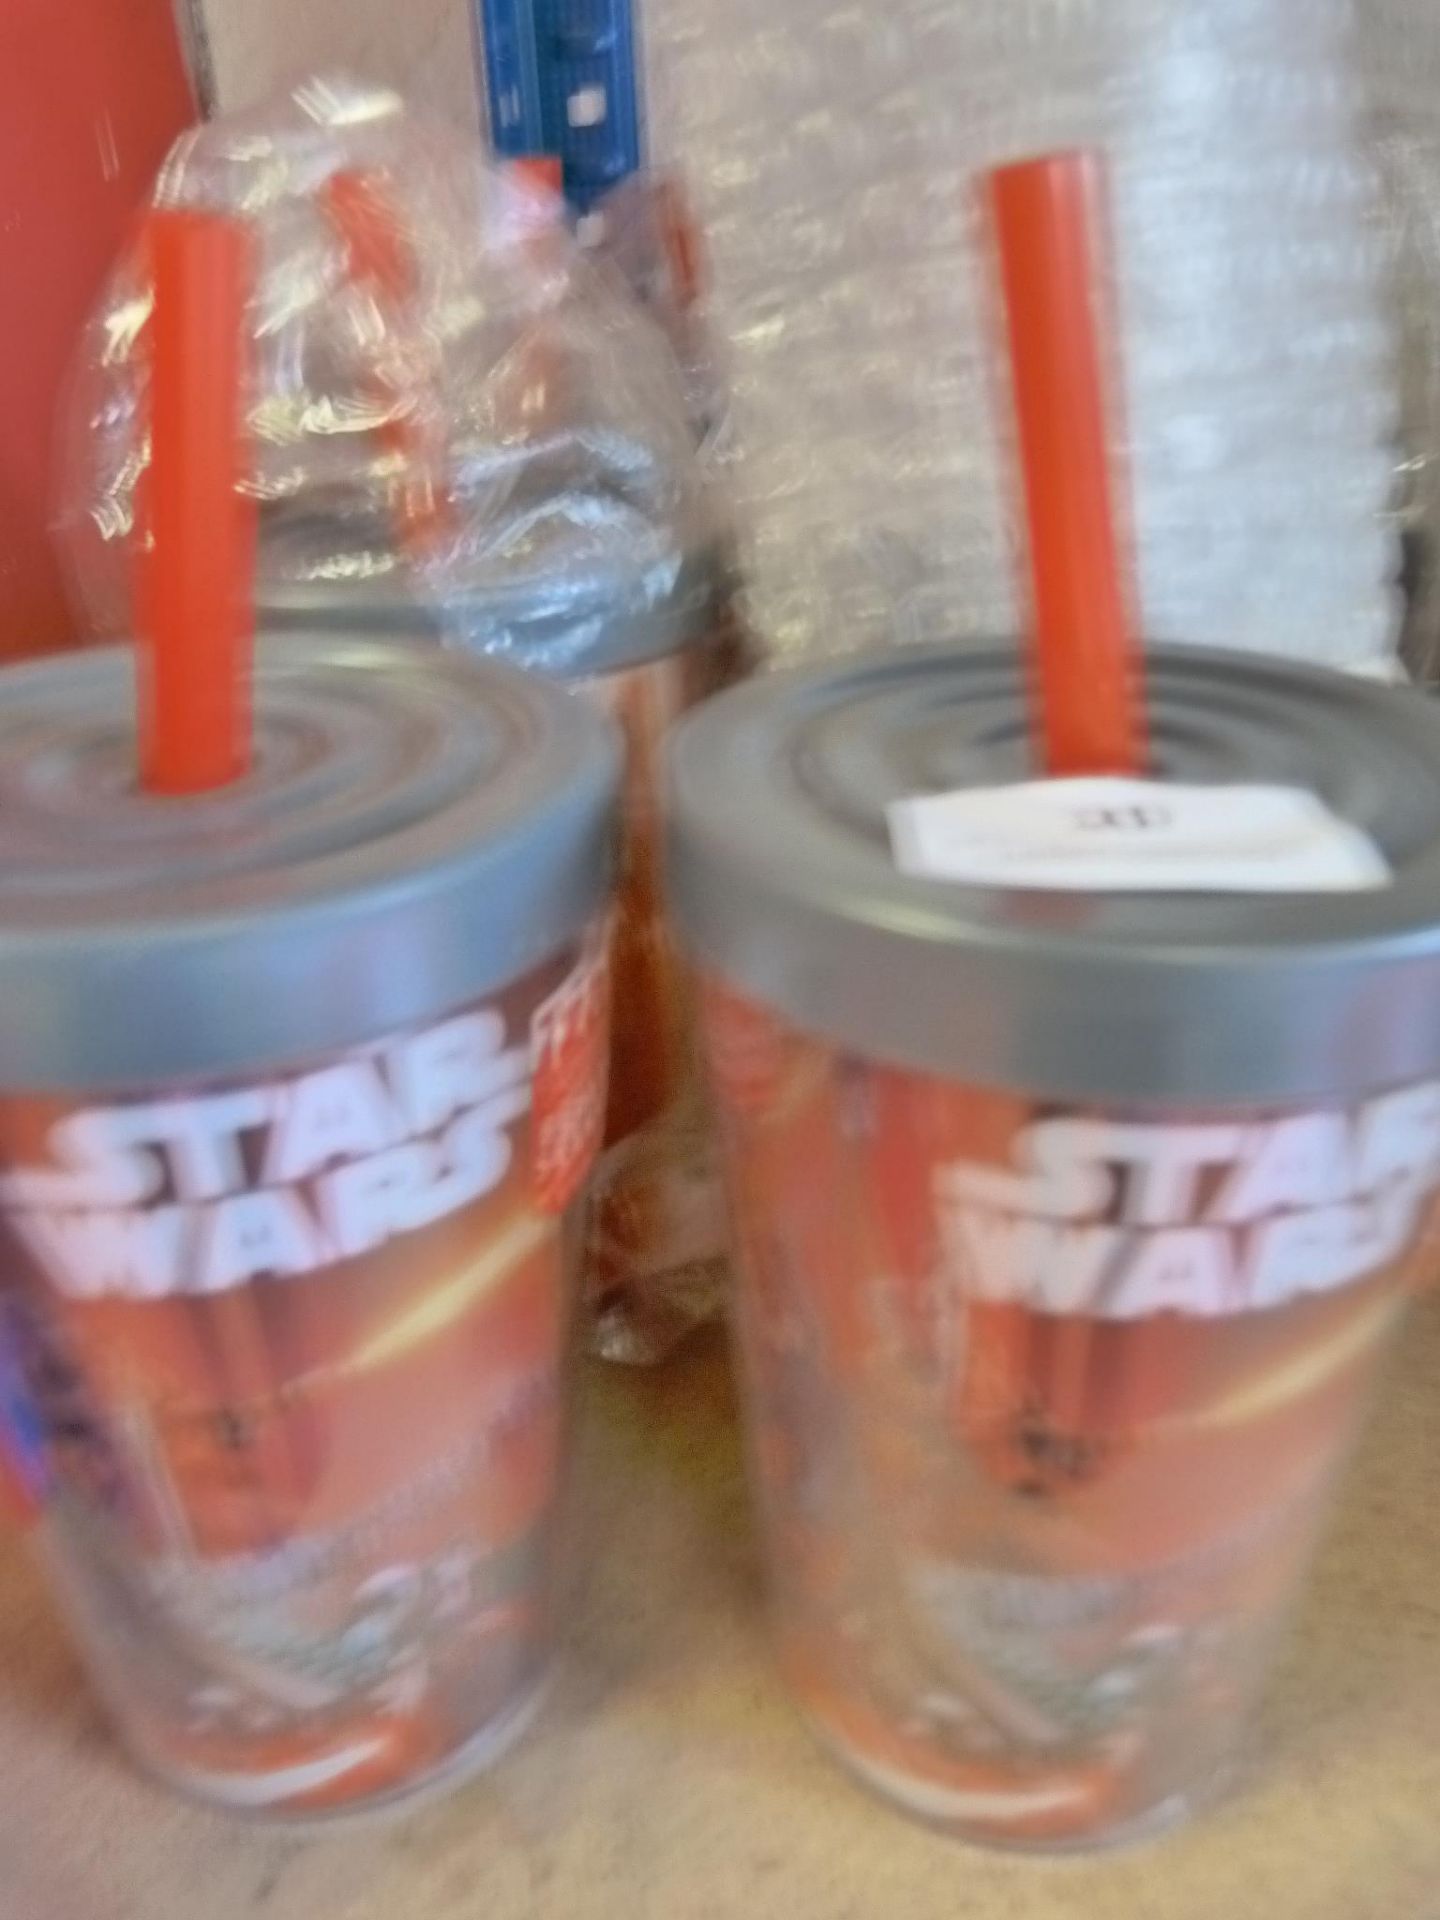 *Eight Star Wars Drinking Cup